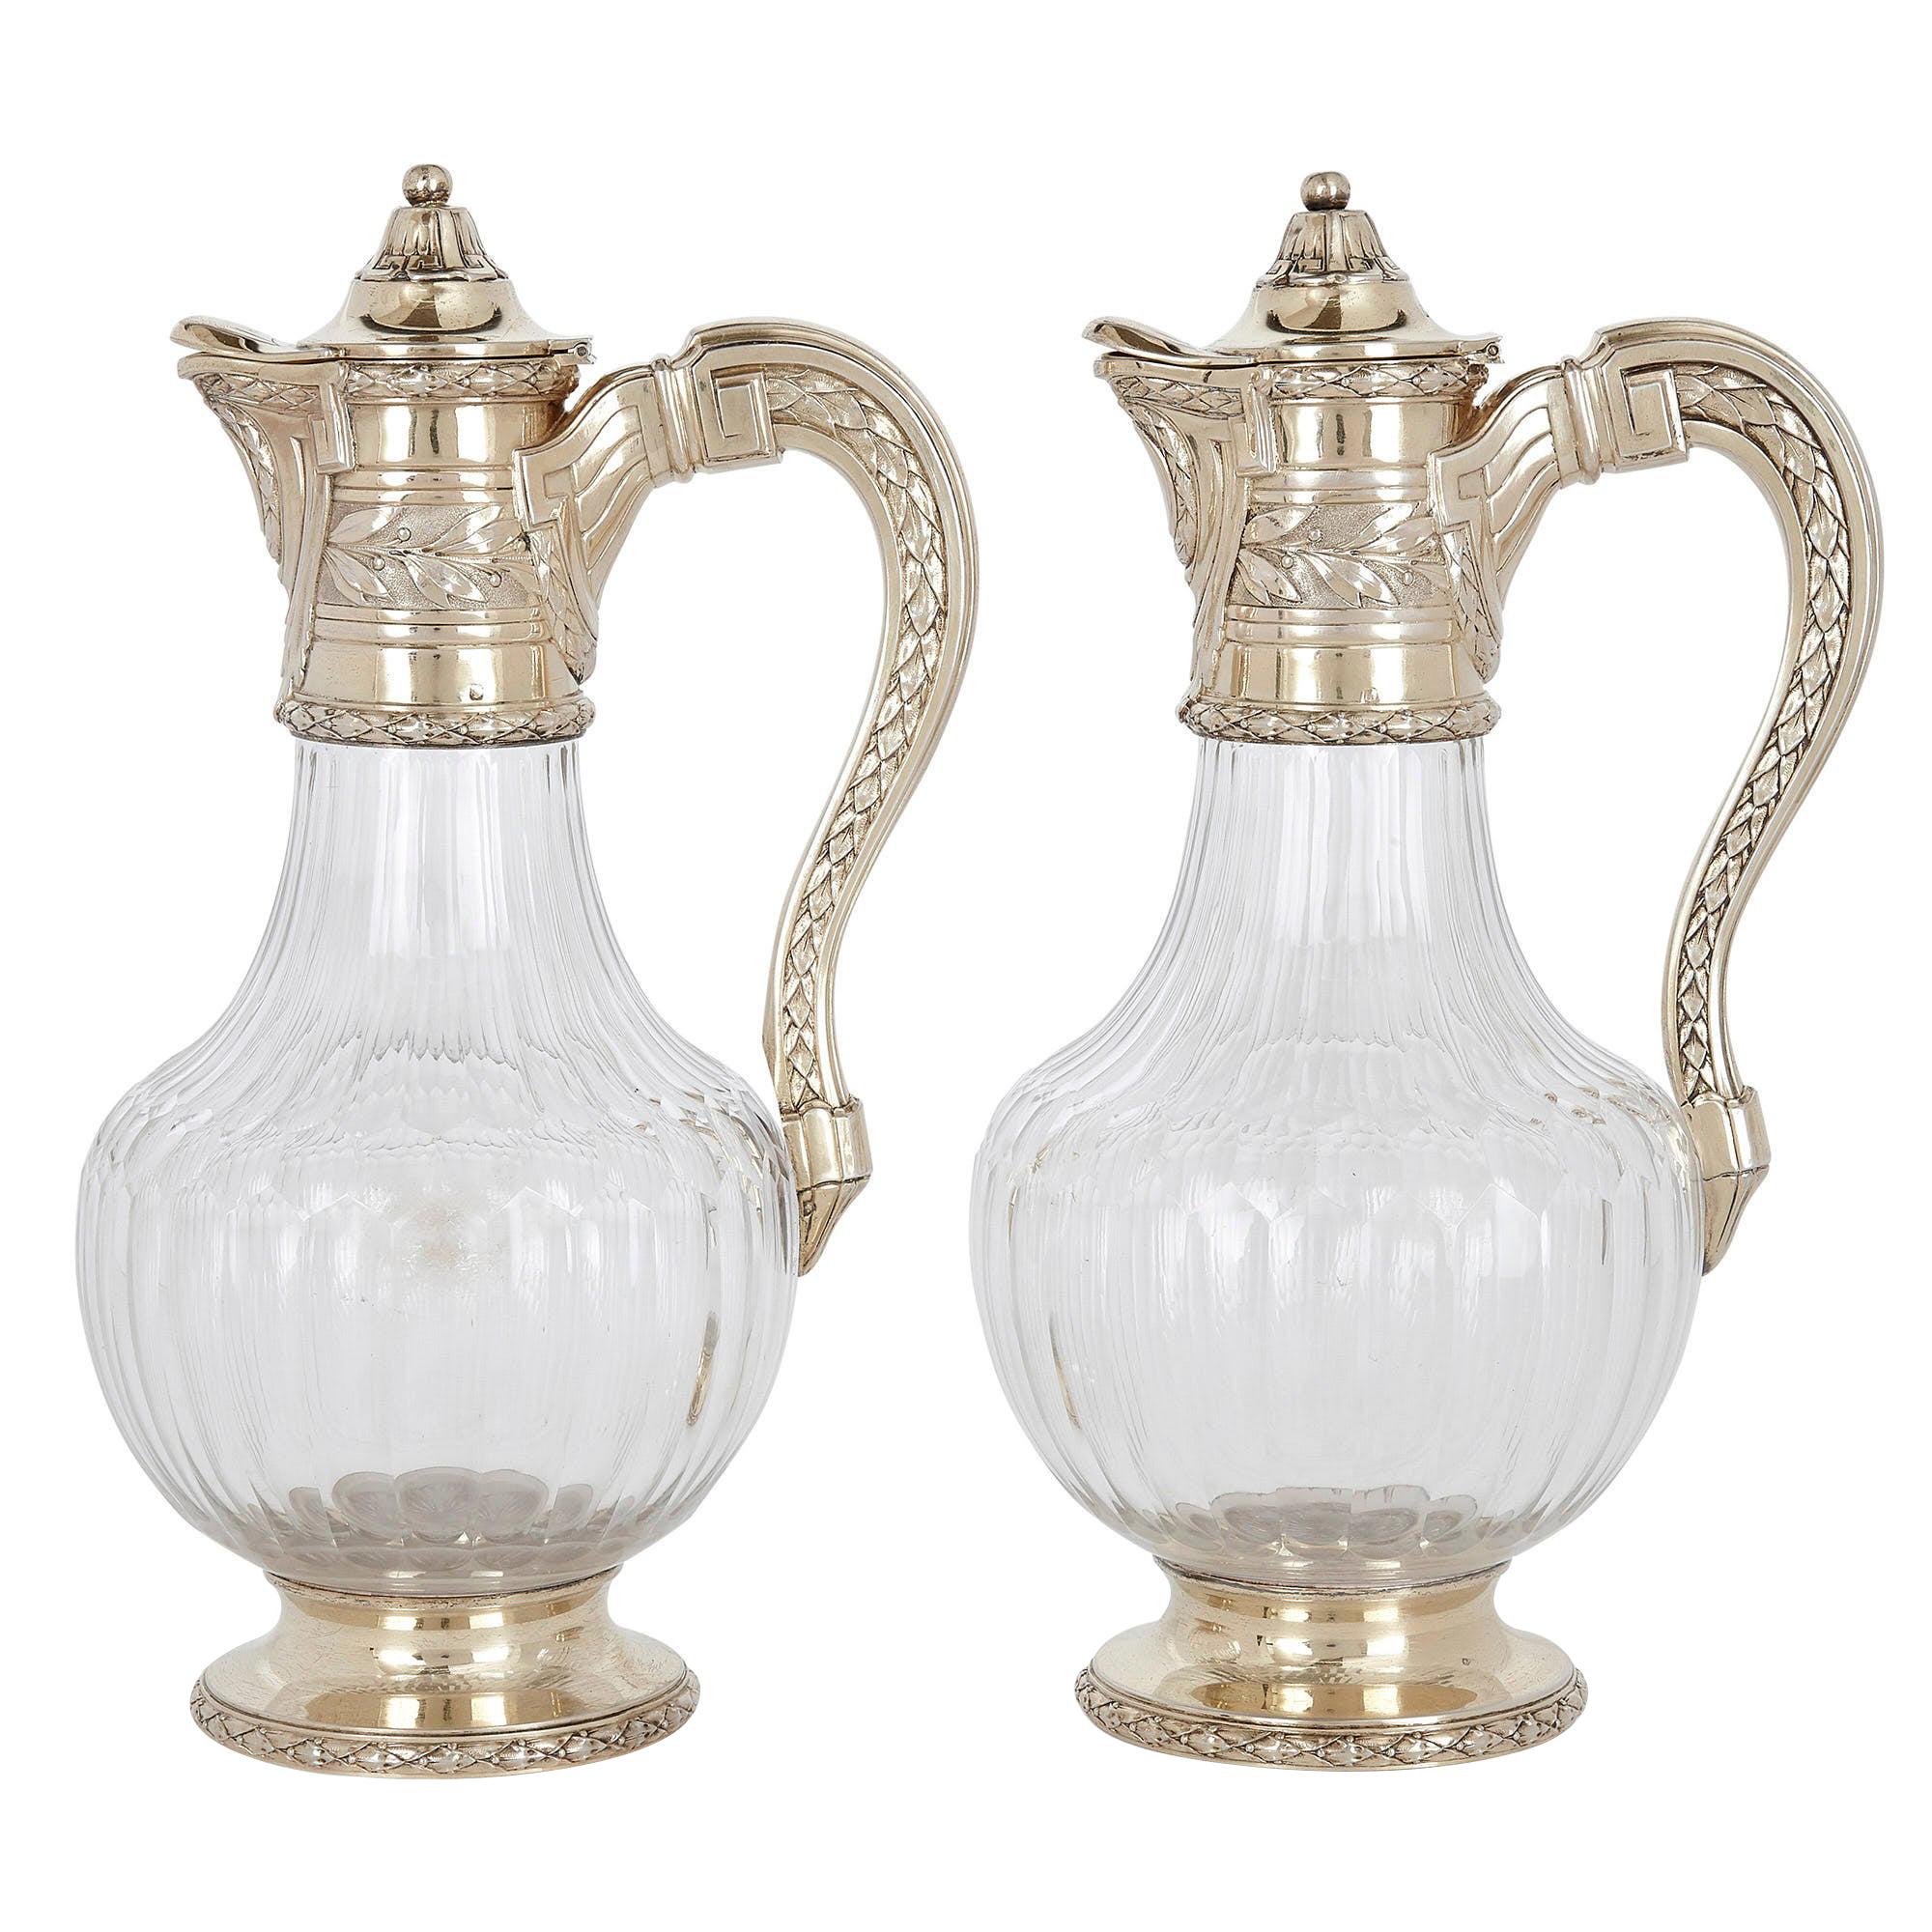 Pair of Vermeil and Cut Glass Claret Jugs by Tétard For Sale